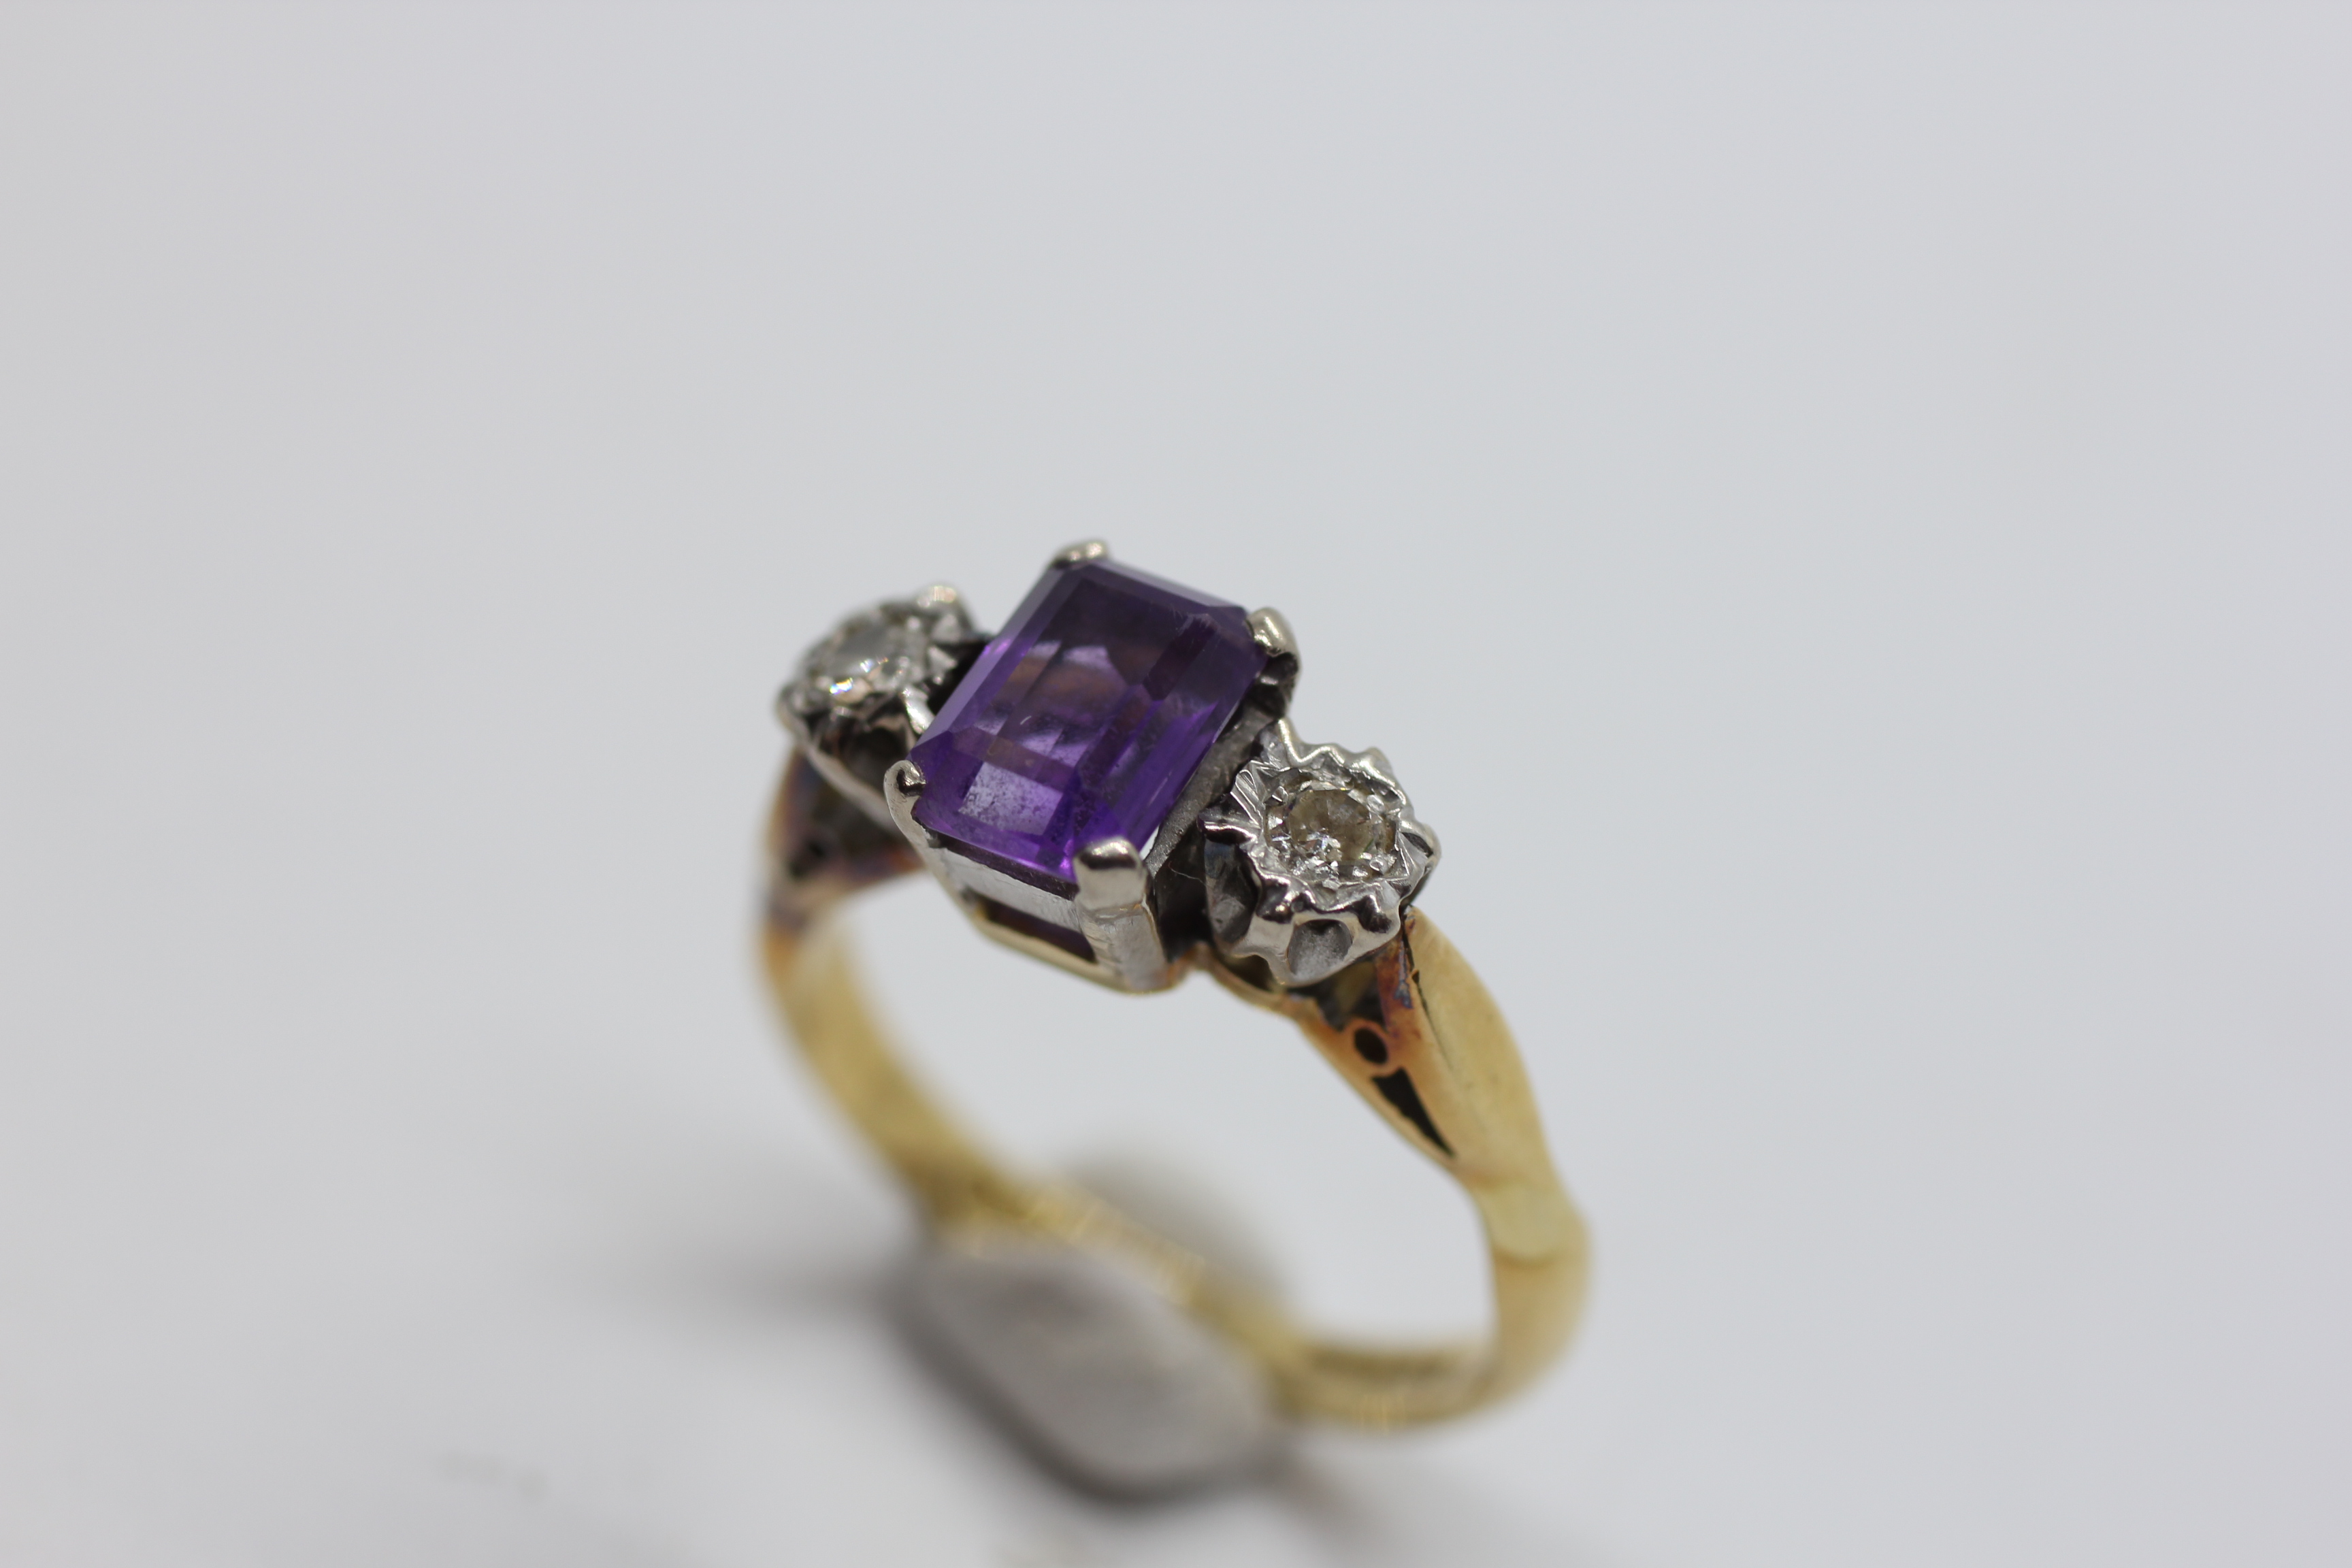 AN 18CT GOLD RING SET WITH A CENTRAL EMERALD CUT AMETHYST AND A DIAMOND EITHER SIDE. - Image 6 of 7